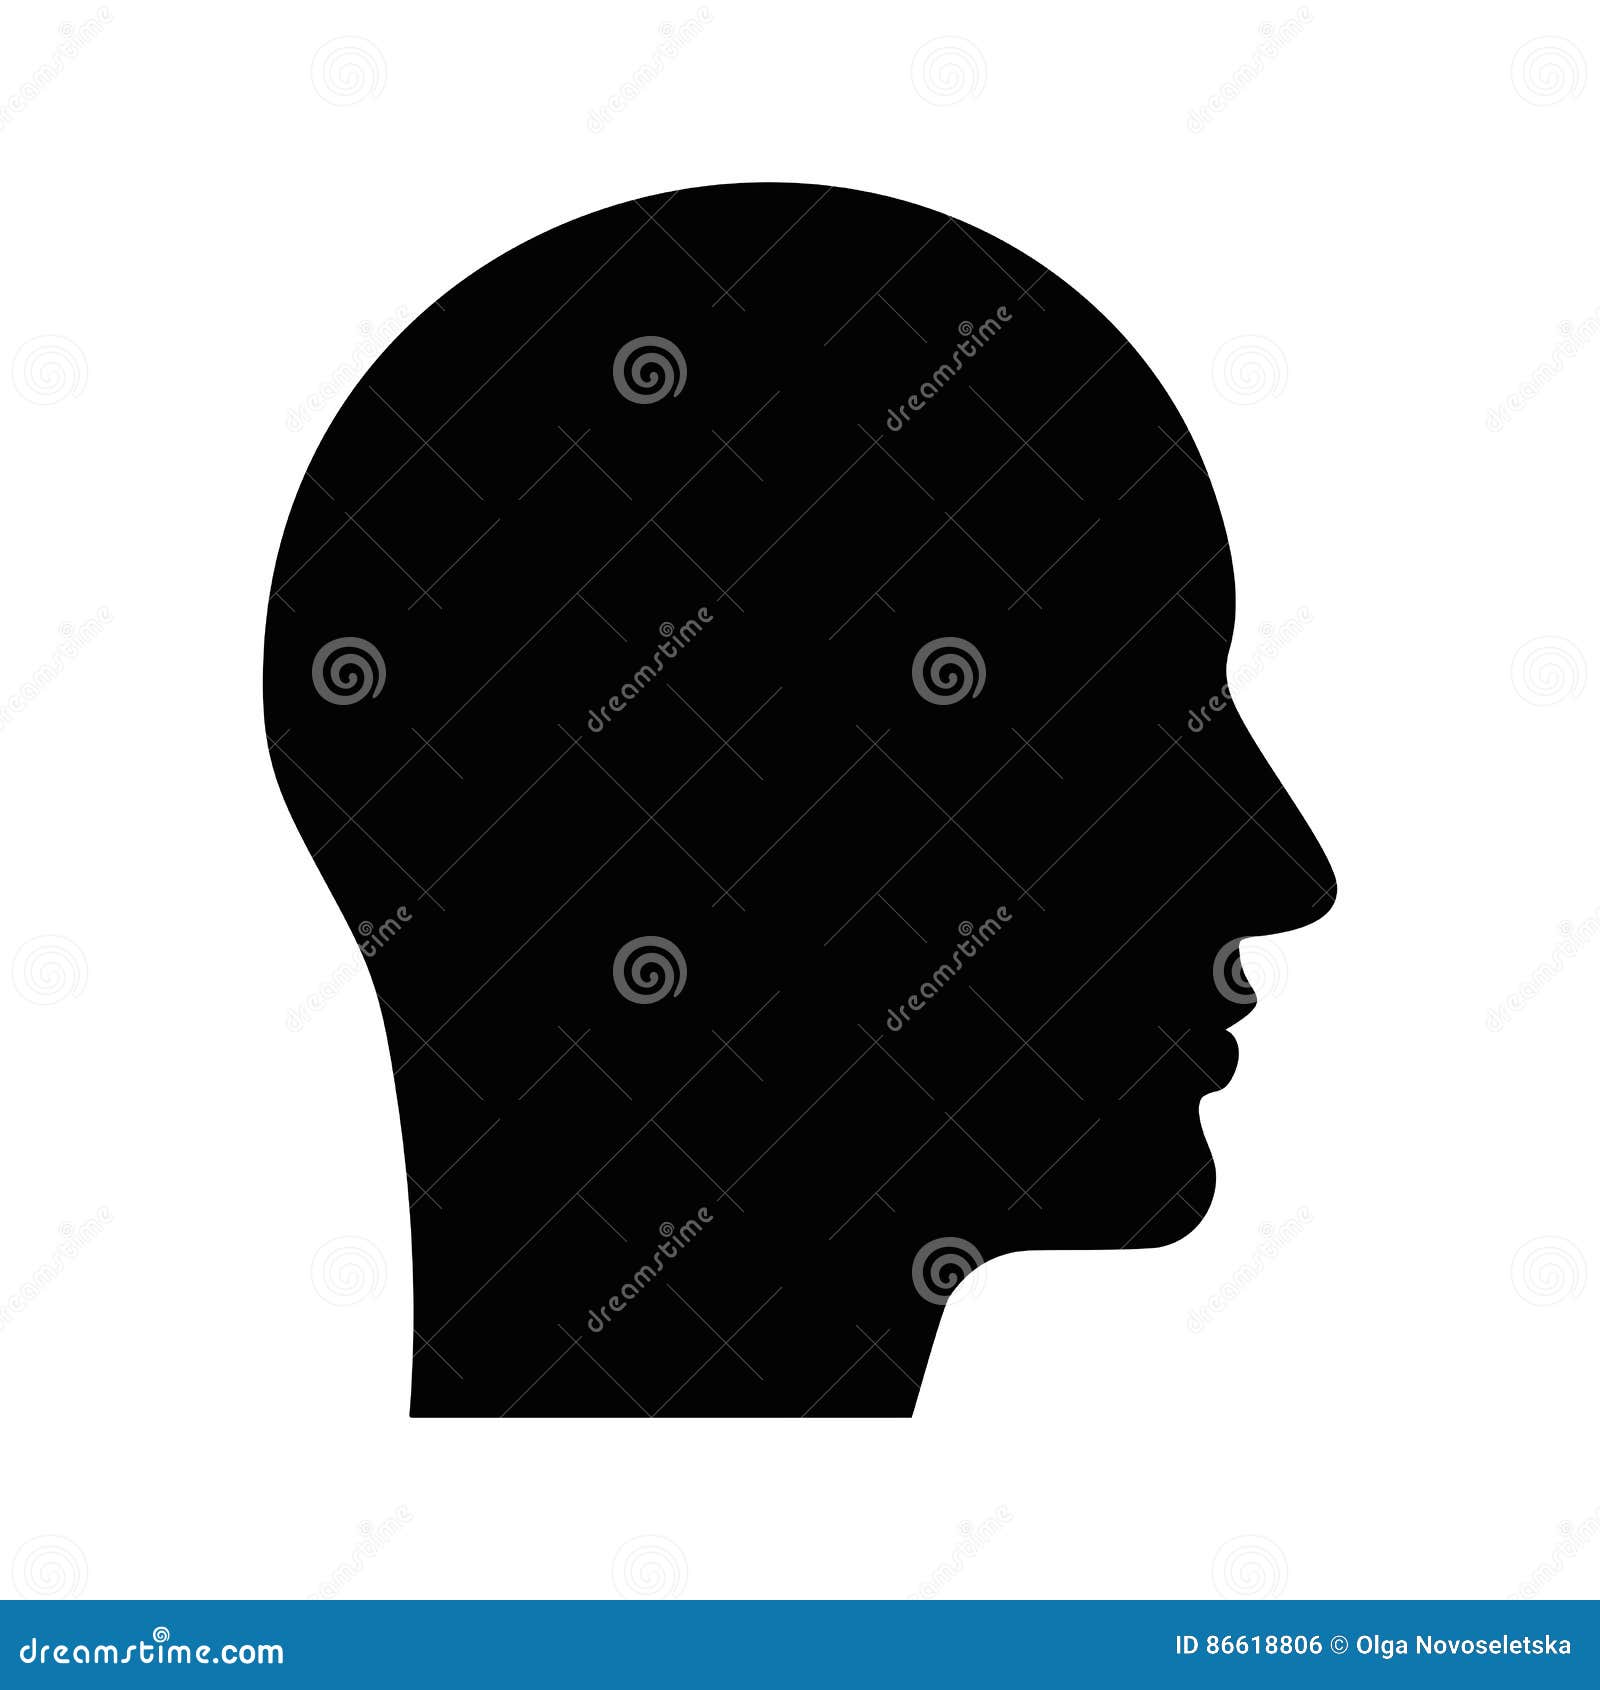 1,000+ Empty Profile Picture Stock Illustrations, Royalty-Free